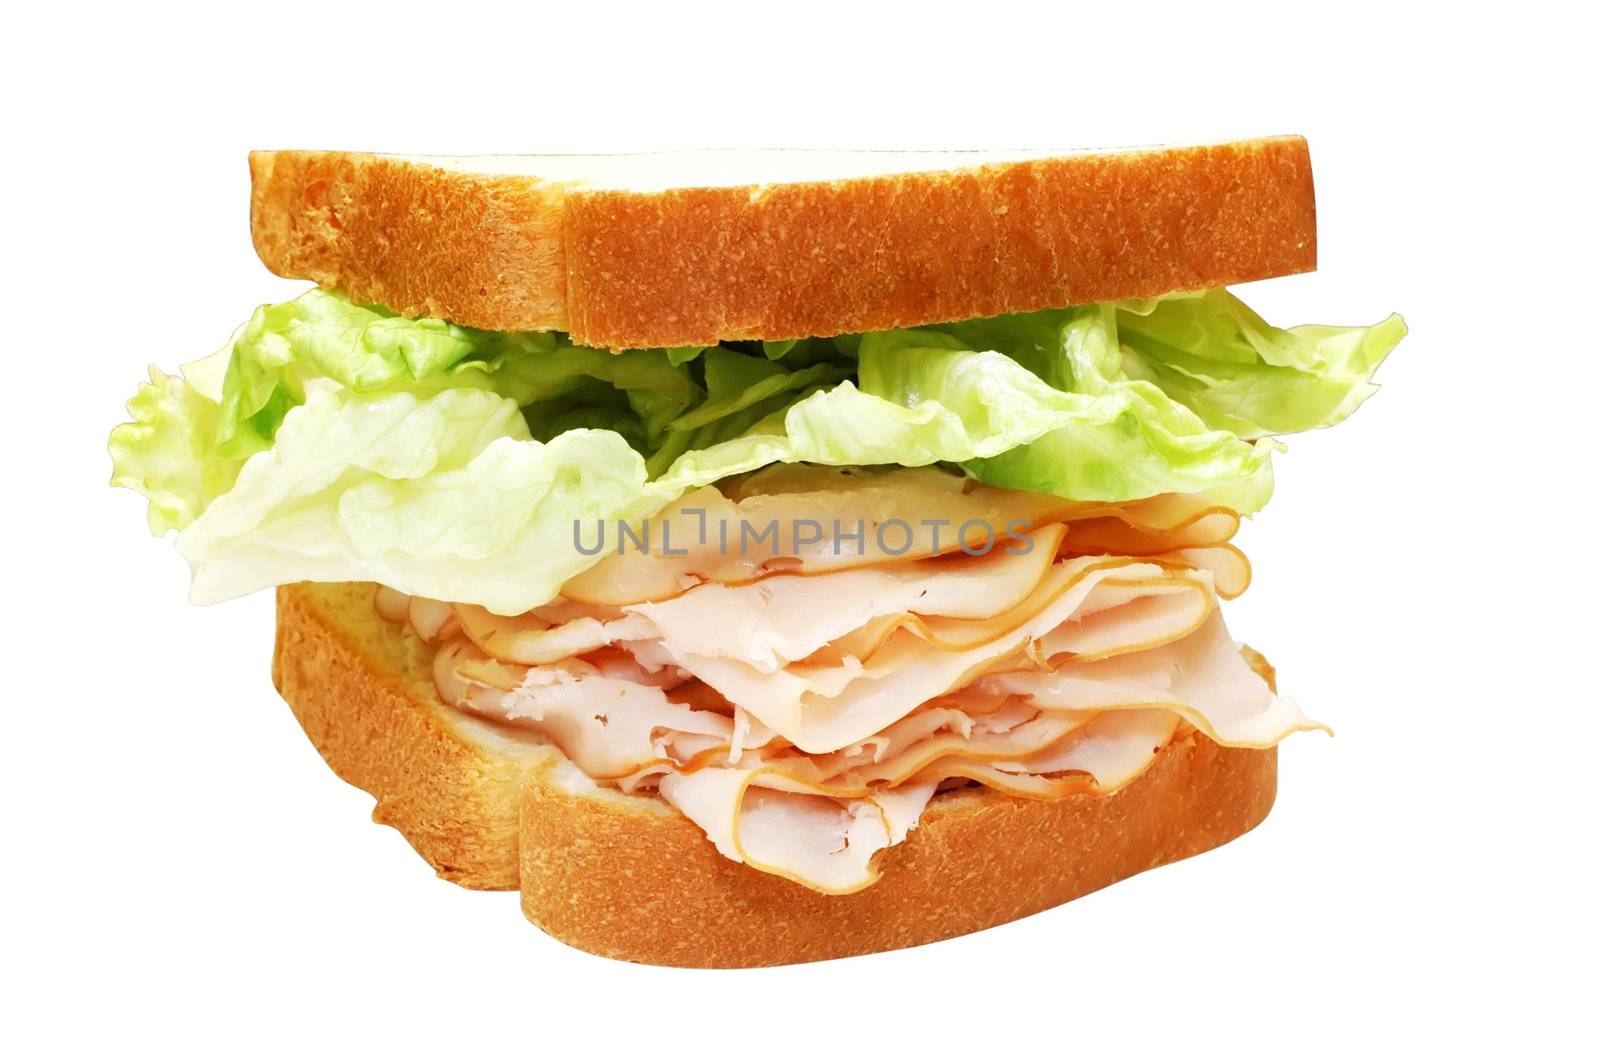 Turkey and lettuce sandwich with clipping path.